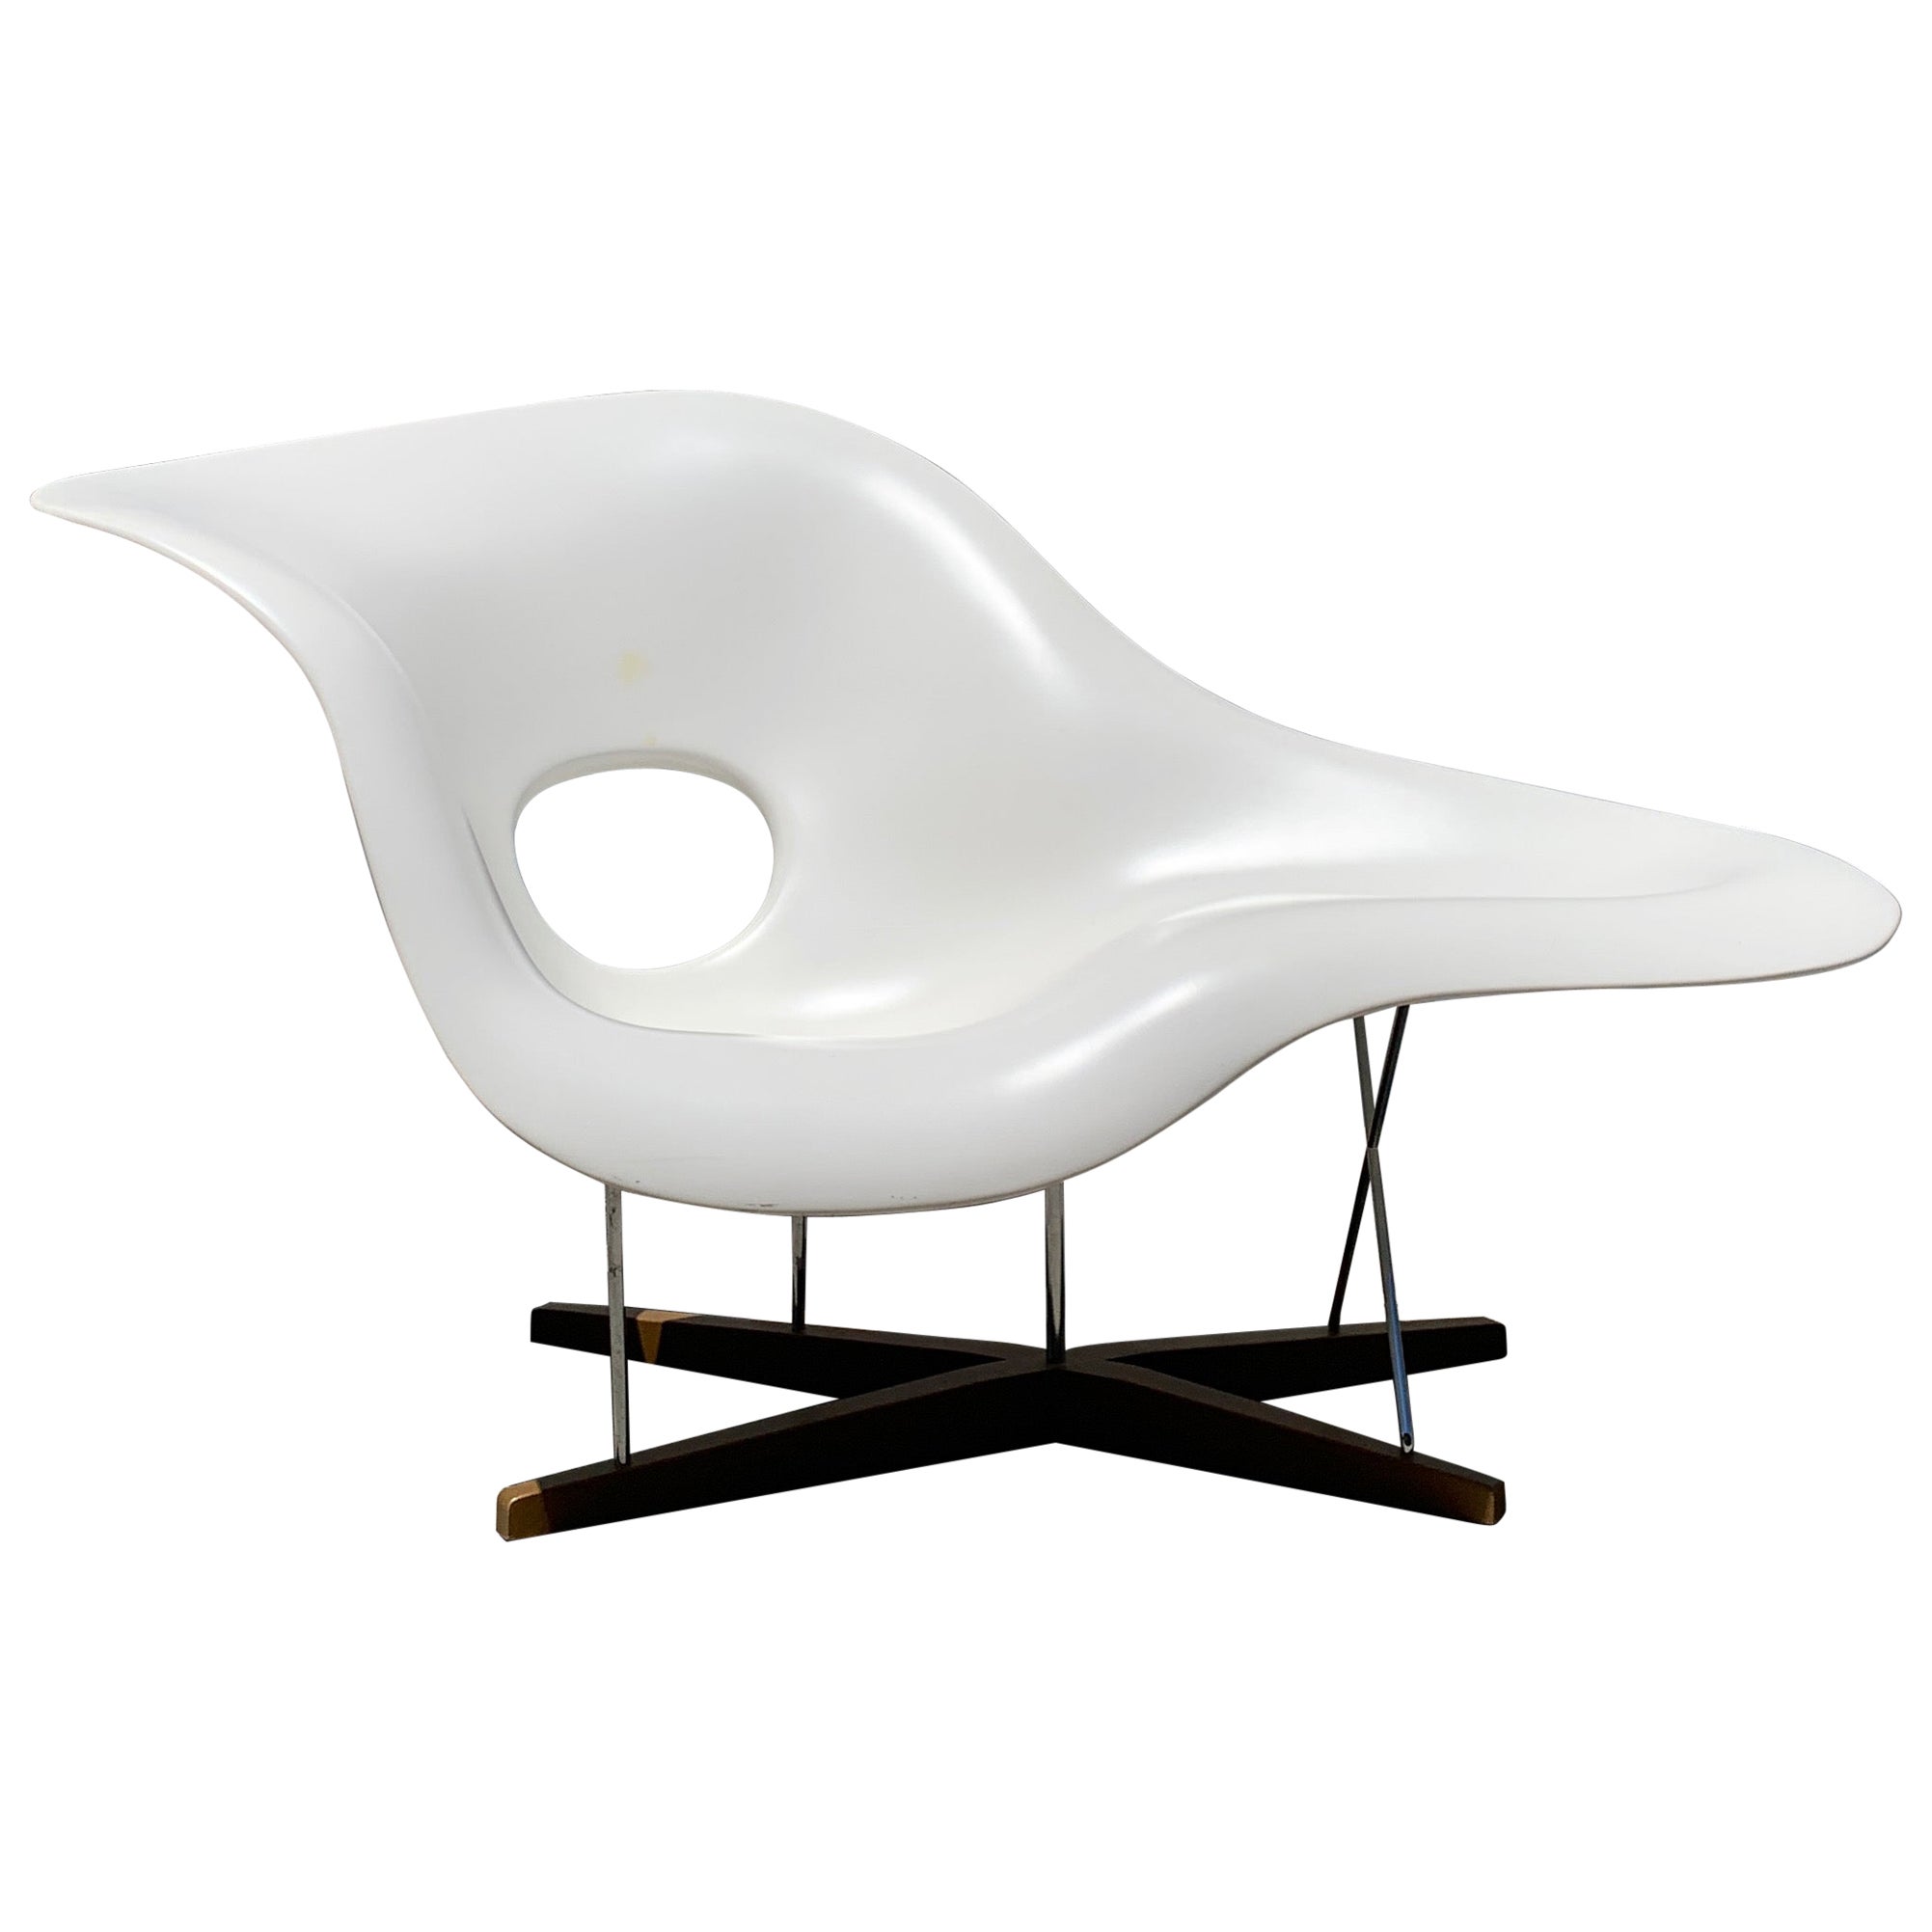 Vitra La Chaise Chair by Charles and Ray Eames